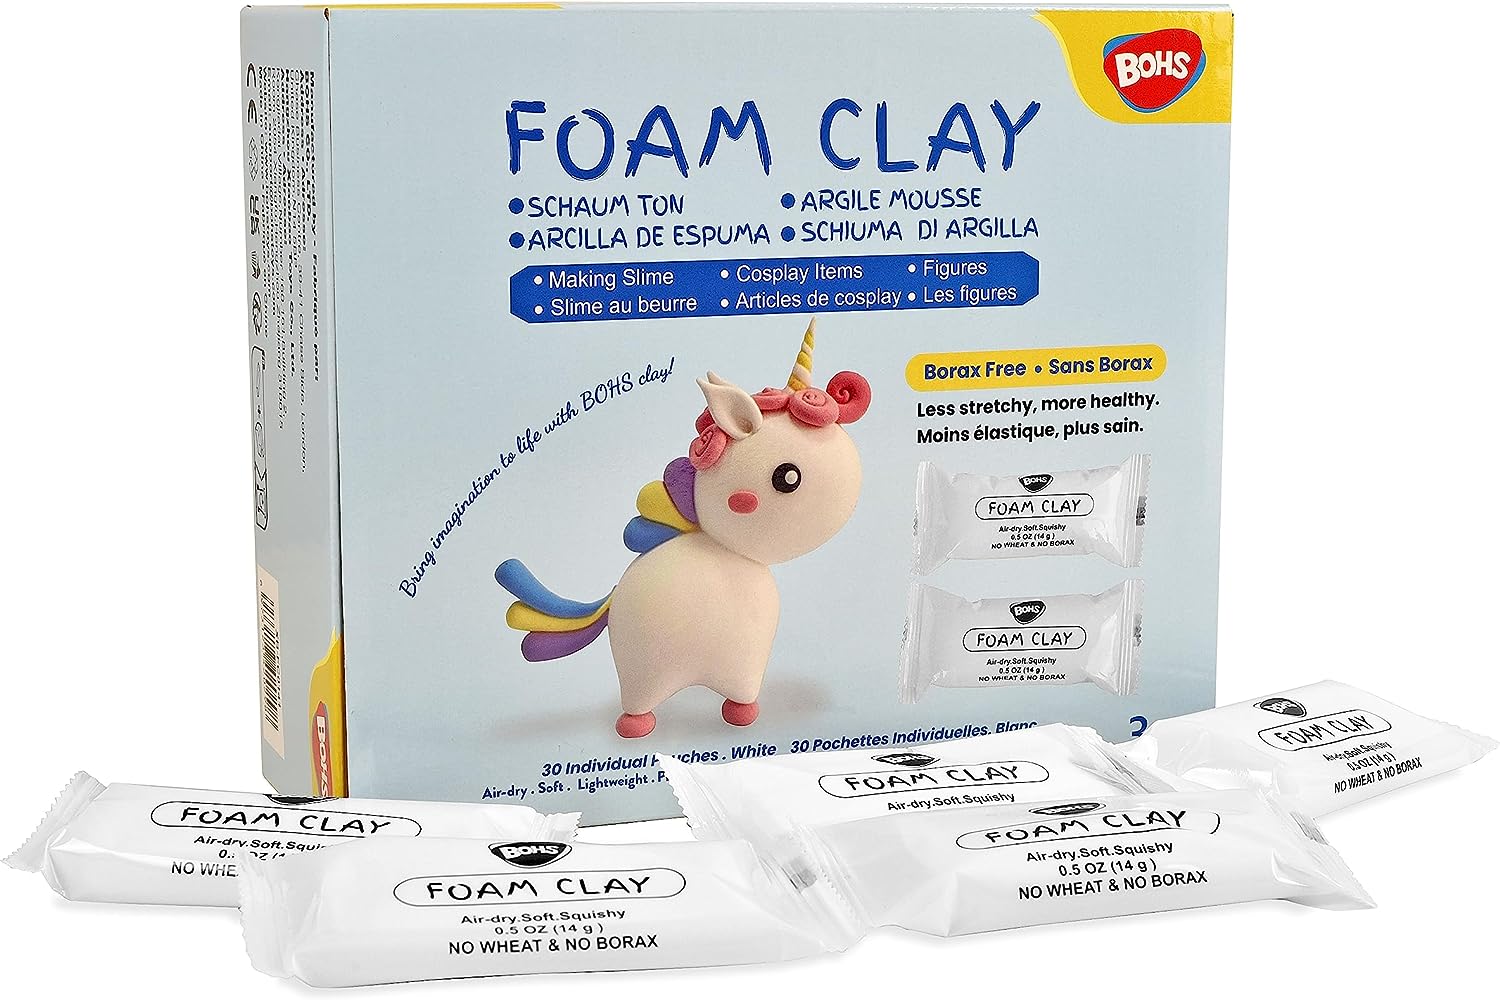 BOHS White Modeling Foam Clay- Air Dry, Squishy,Pliable - Molding Clay